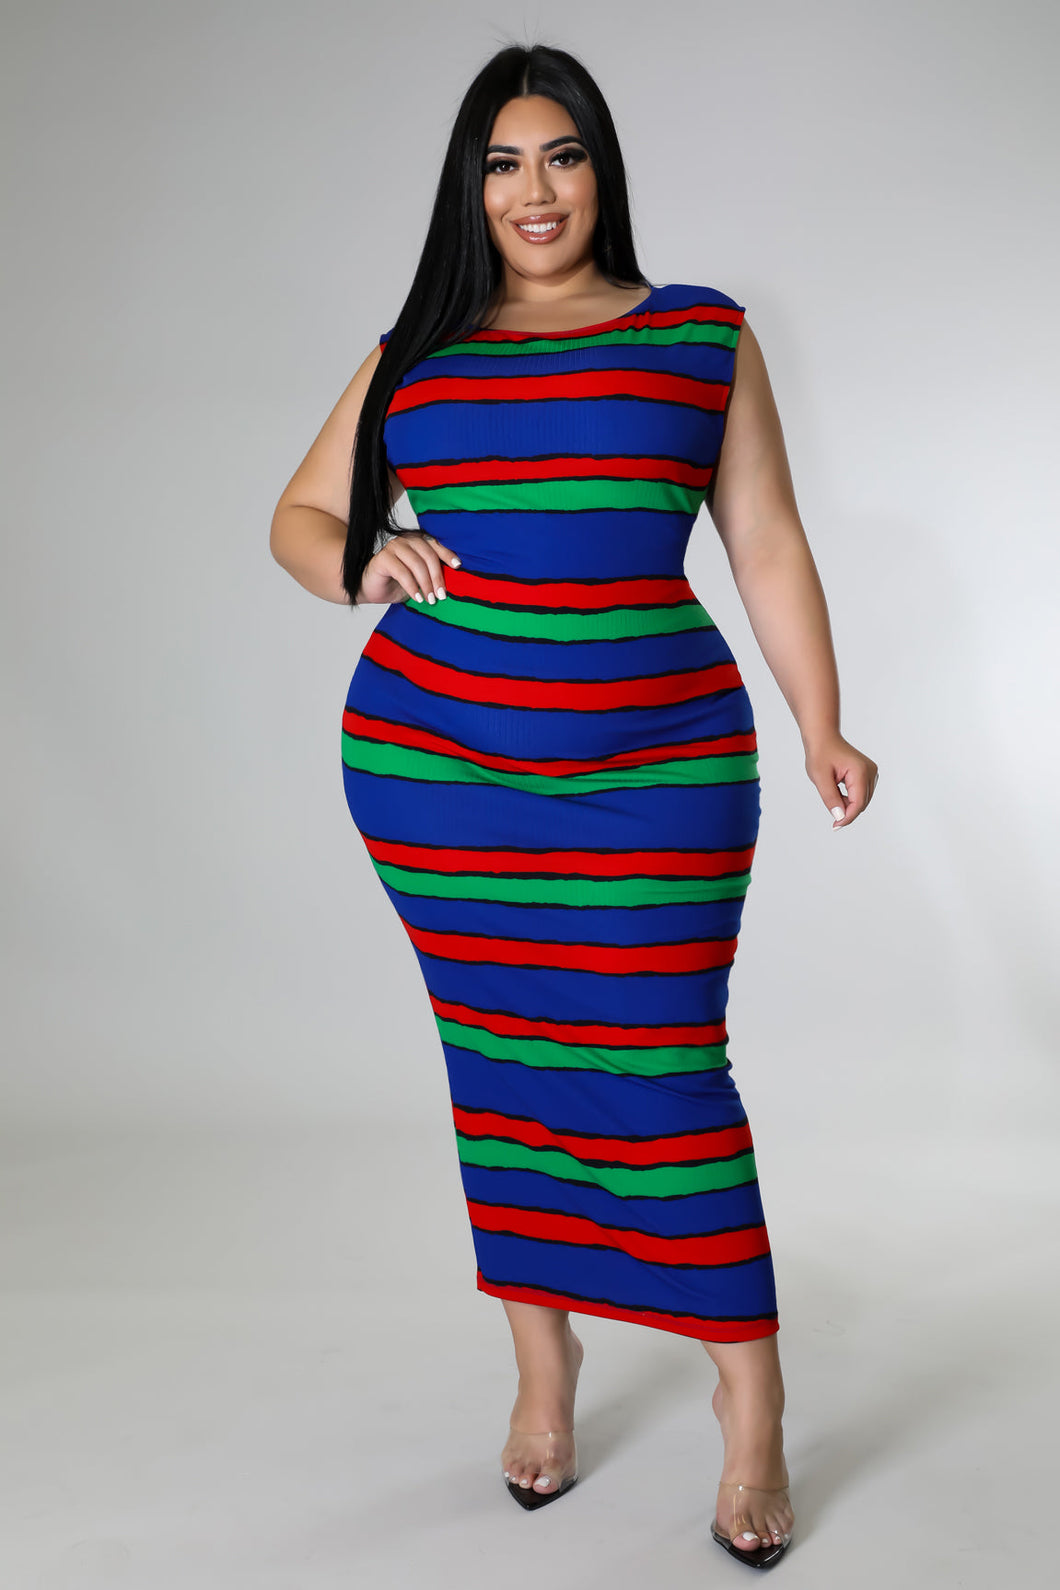 Easy to Love Me Dress (Plus Size)